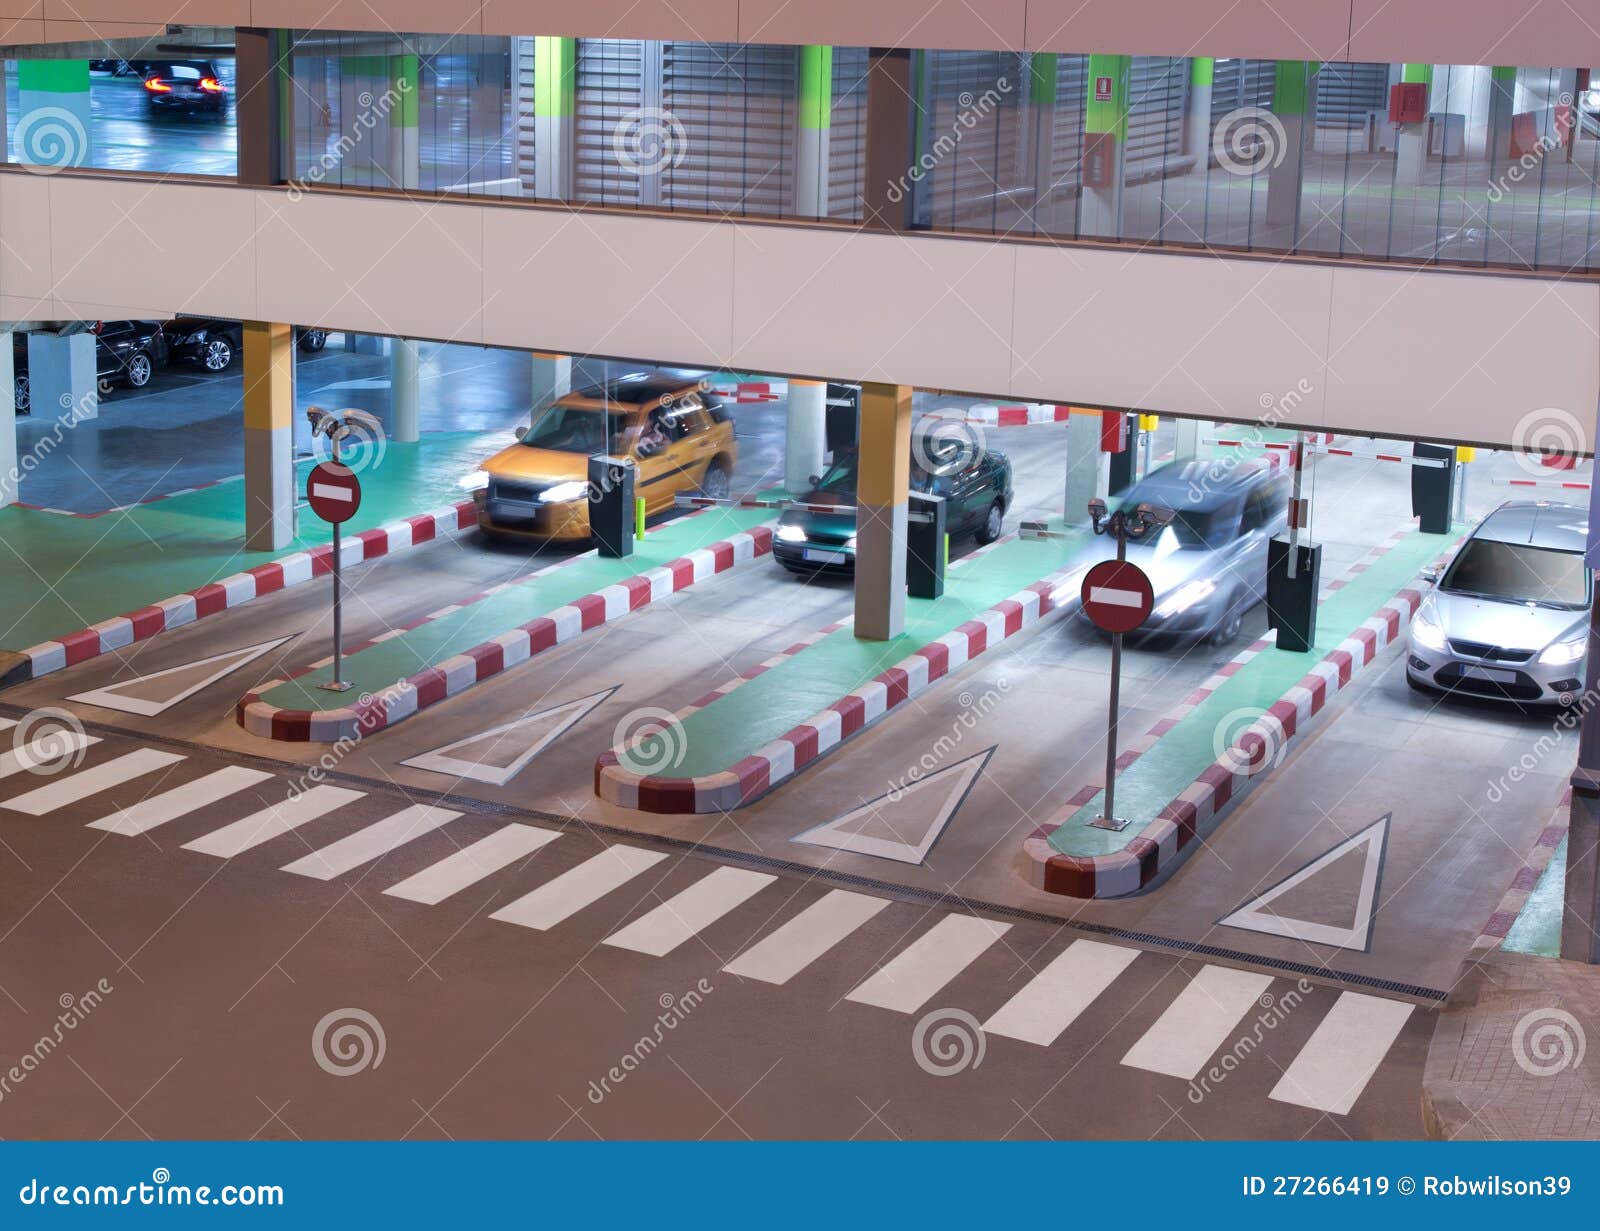 Parking Garage stock image. Image of protection, auto - 27266419